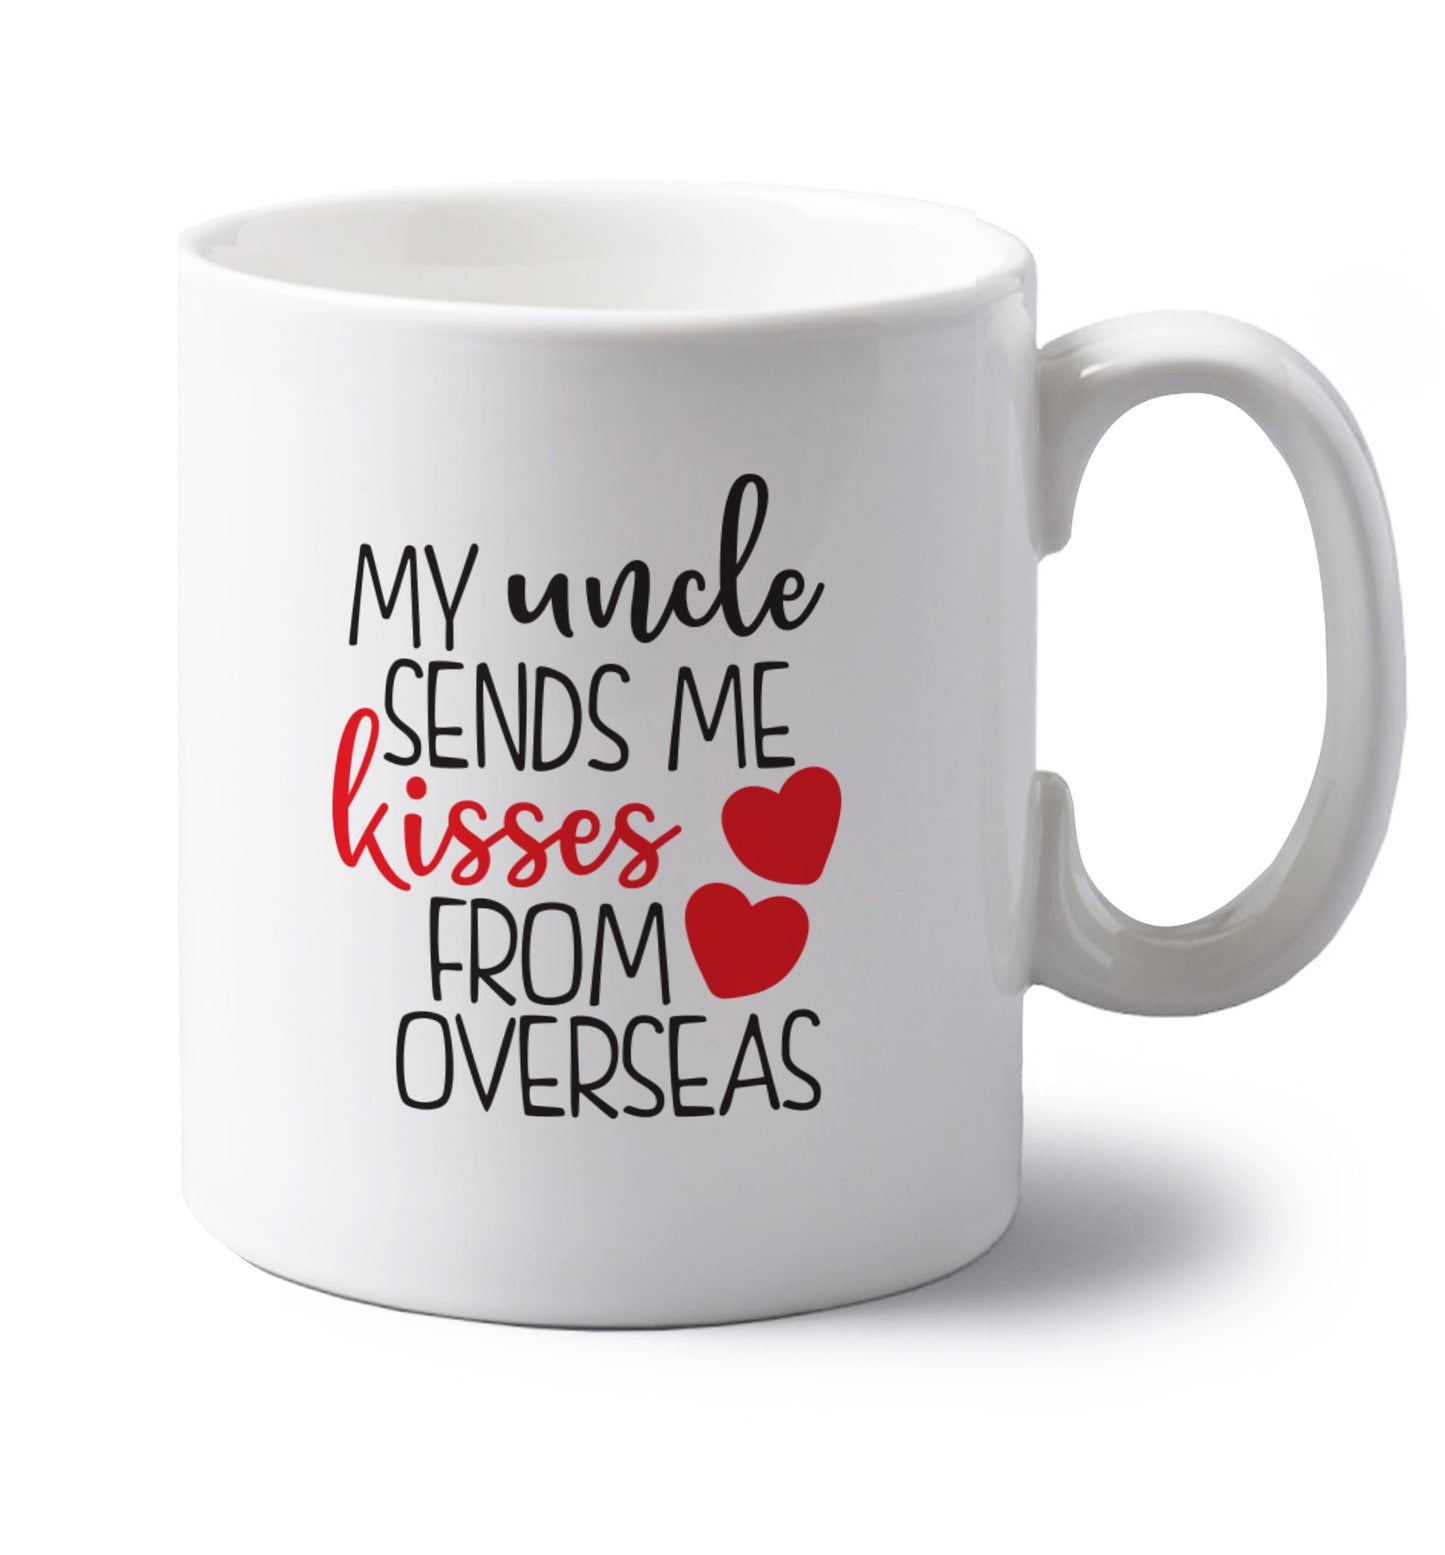 My uncle sends me kisses from overseas left handed white ceramic mug 